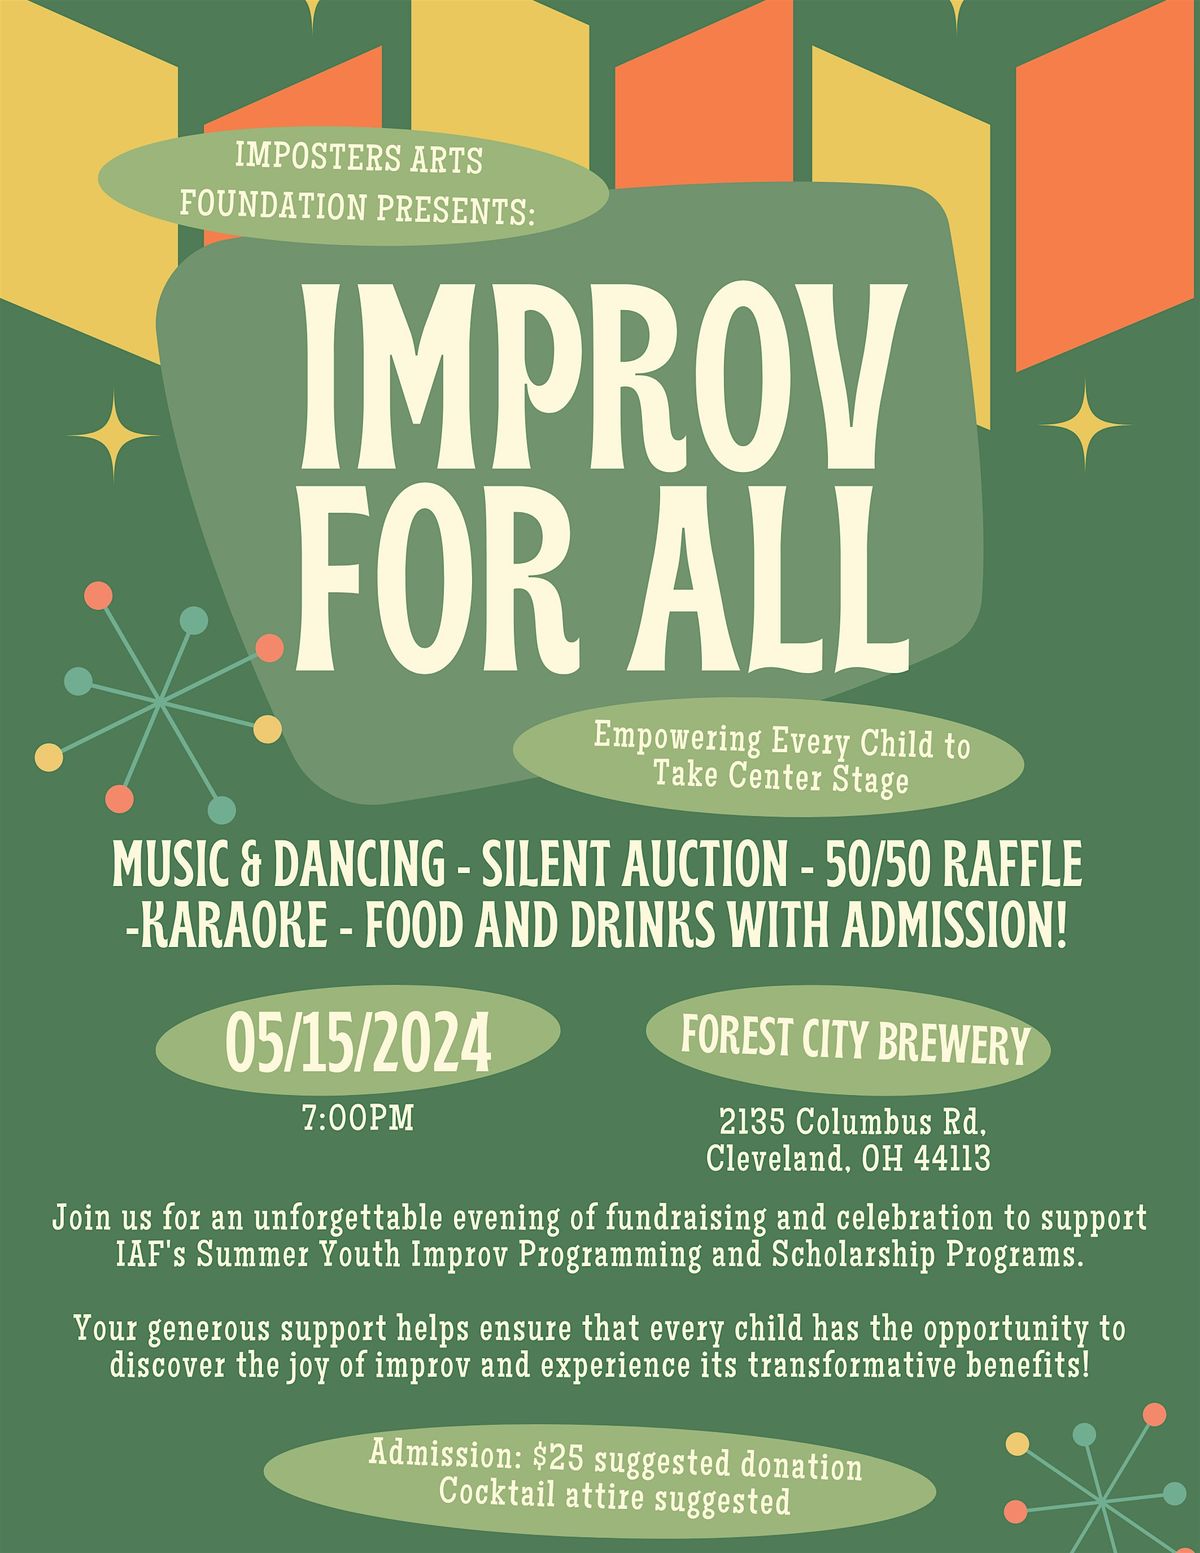 Imposters Arts Foundation presents:  Improv for All